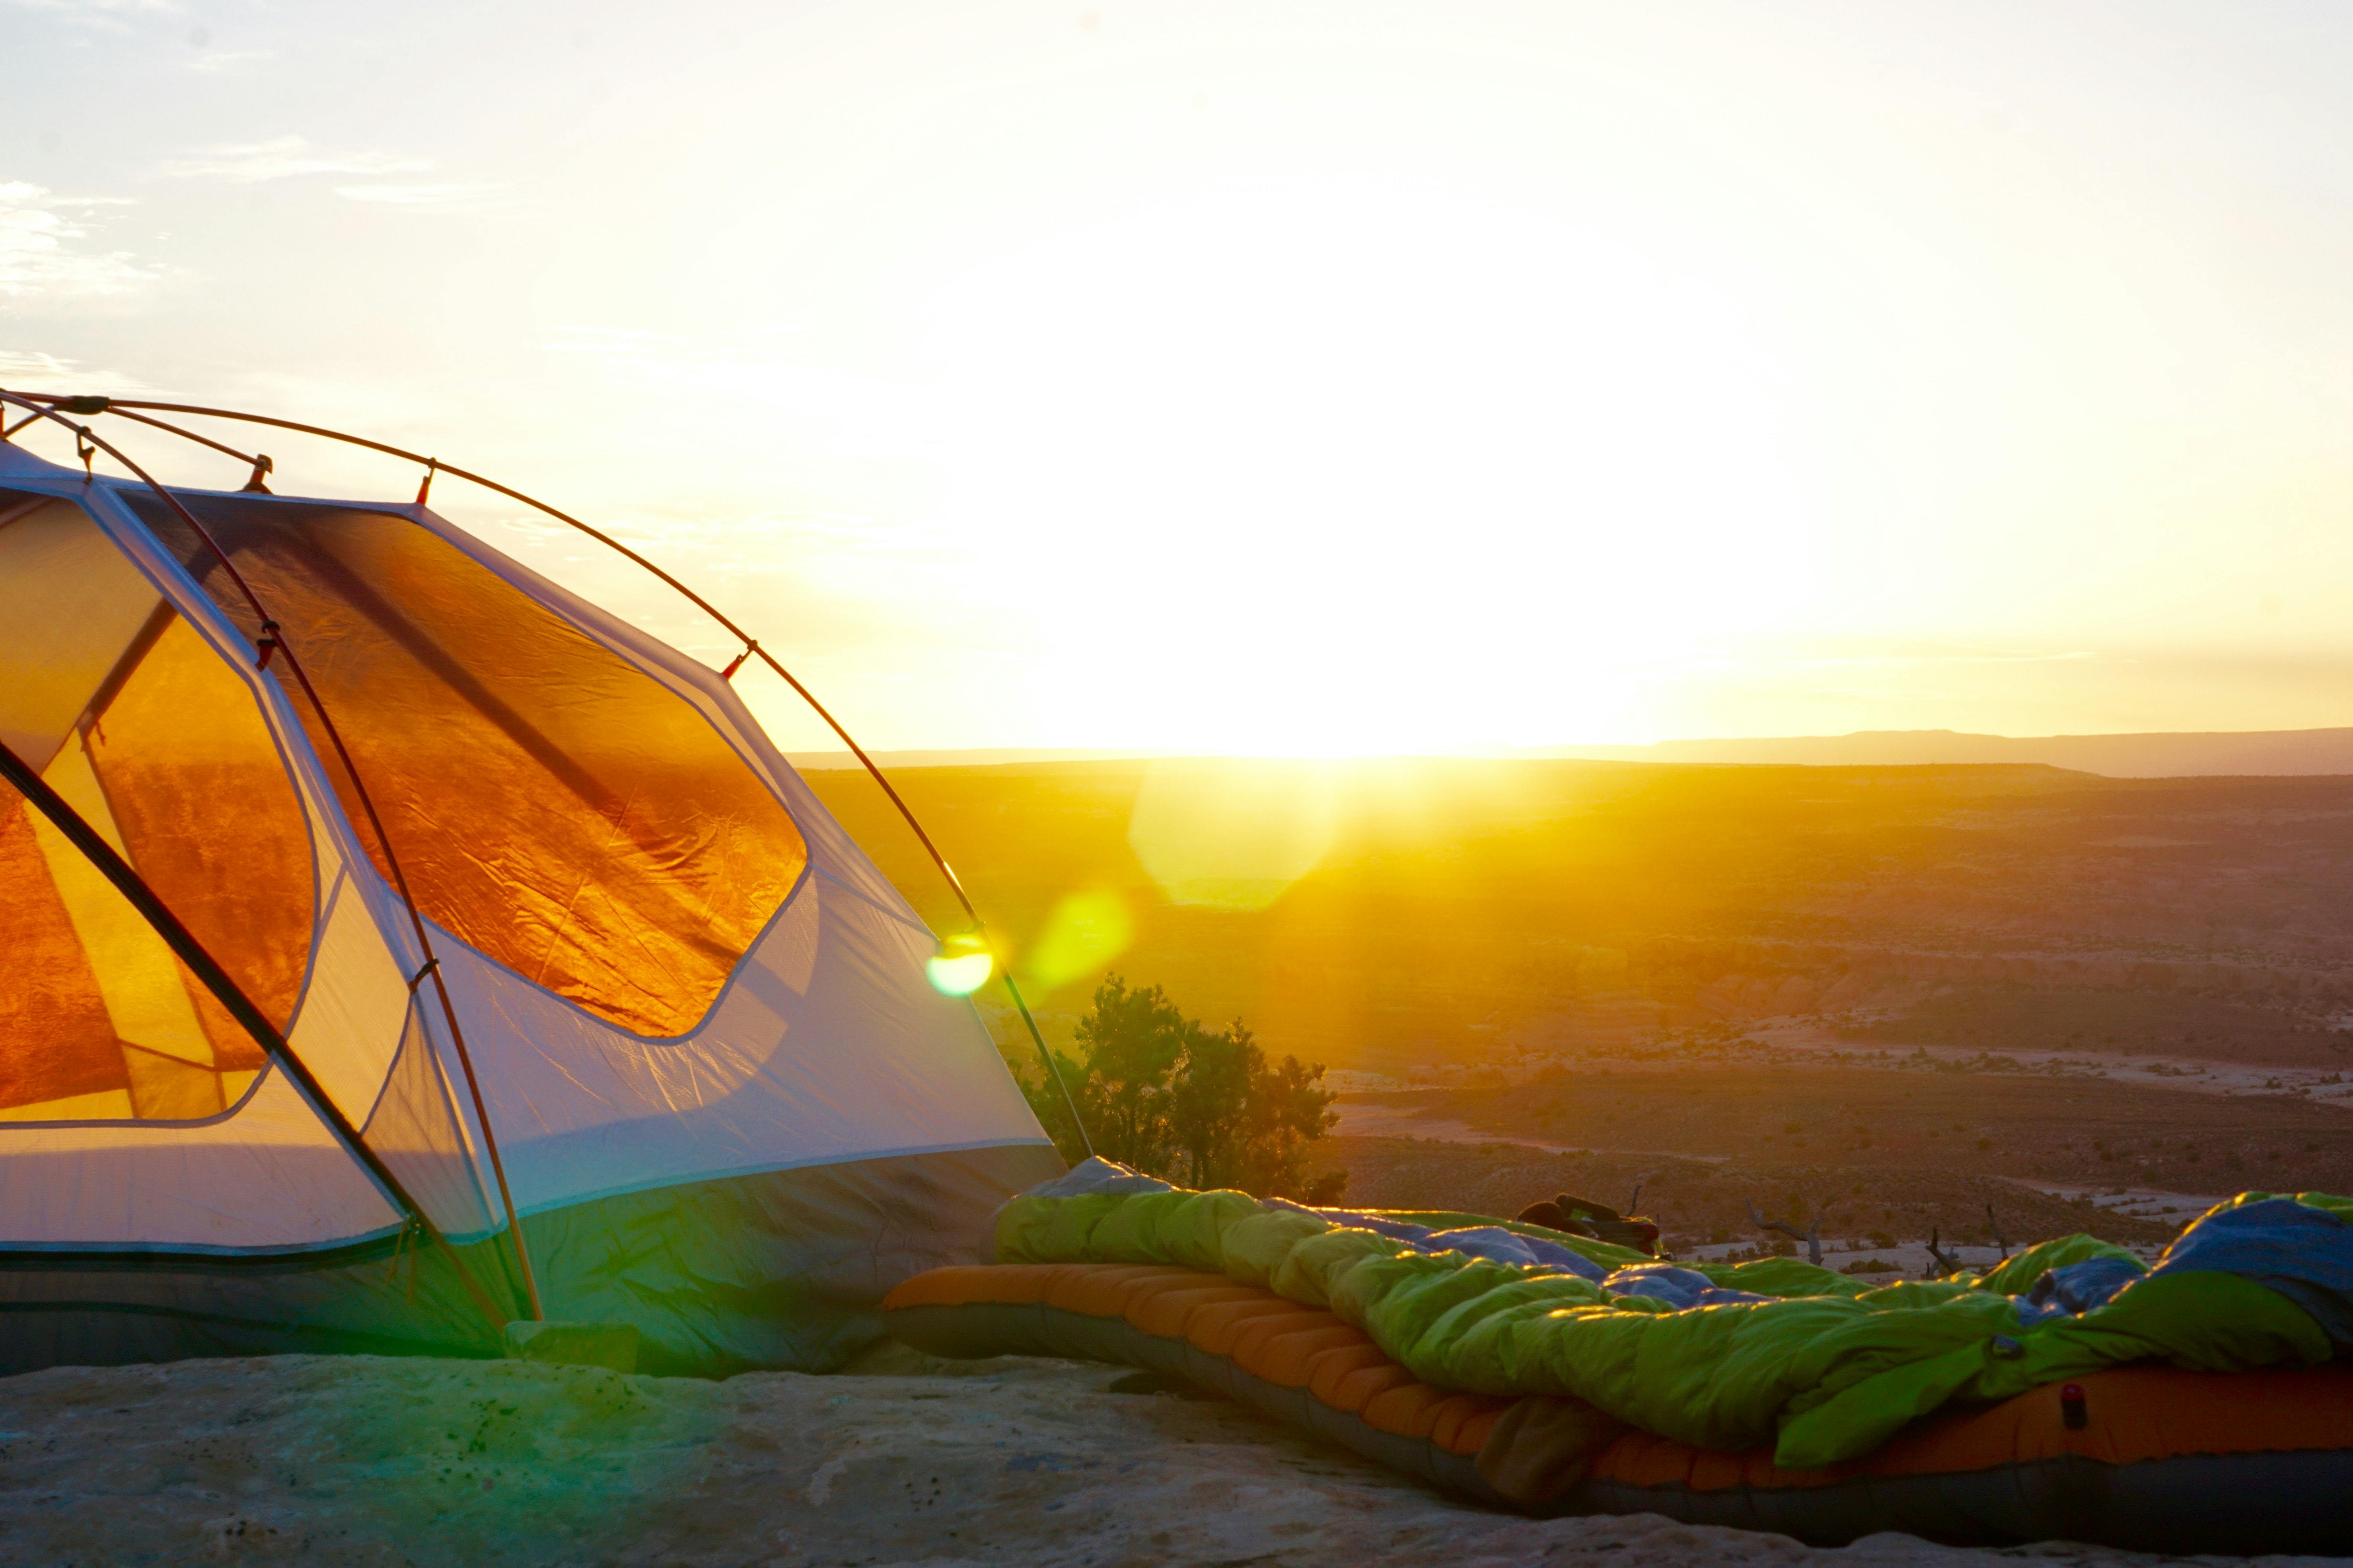 A sleeping bag next to a tent on an overlook with the sun setting in the background